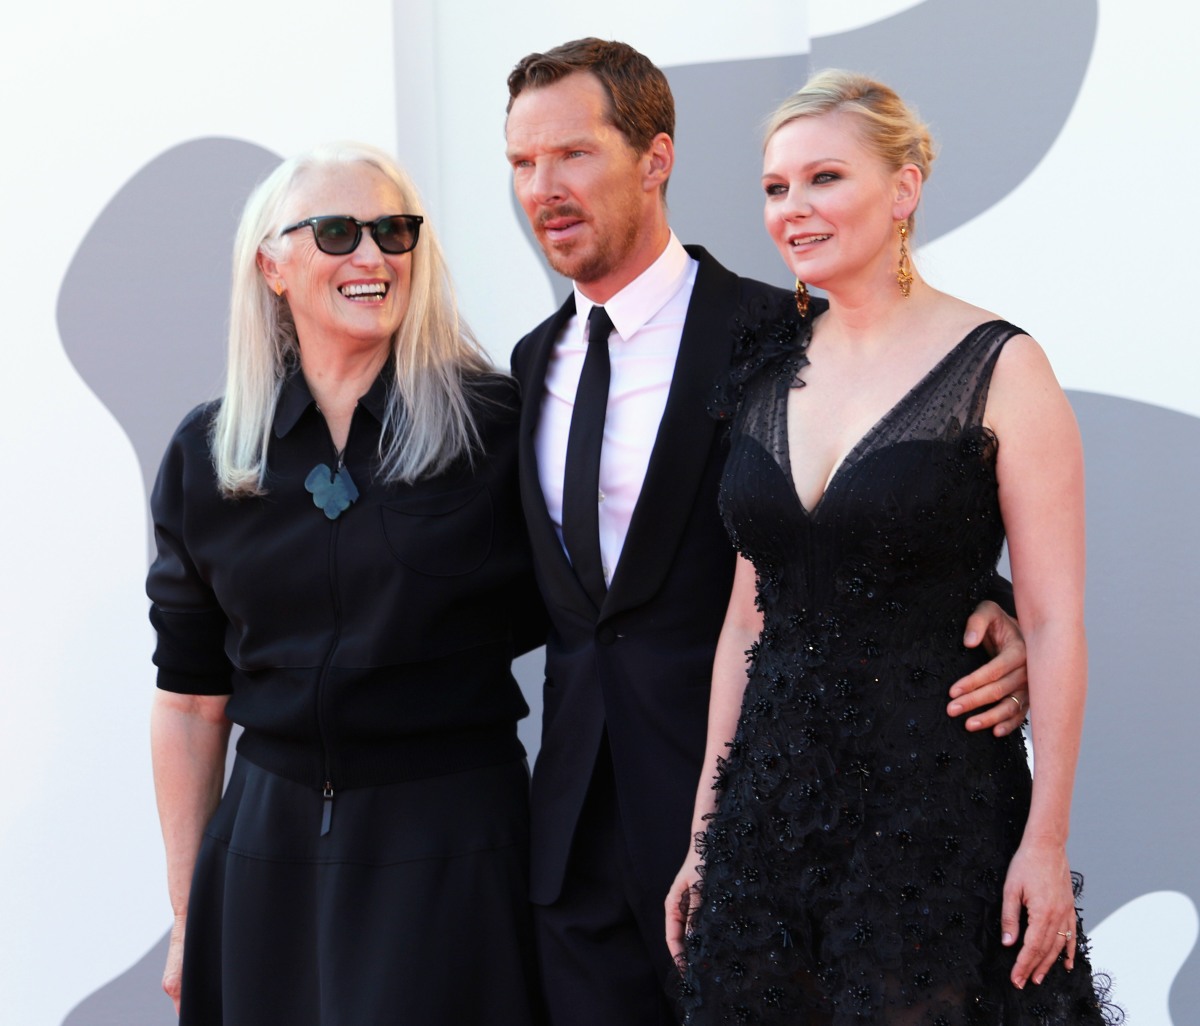 Jane Campion, Benedict Cumberbatch and Kirsten Dunst attend the red carpet of the movie 'The Power of the Dog' during the 78th Venice International Film Festival